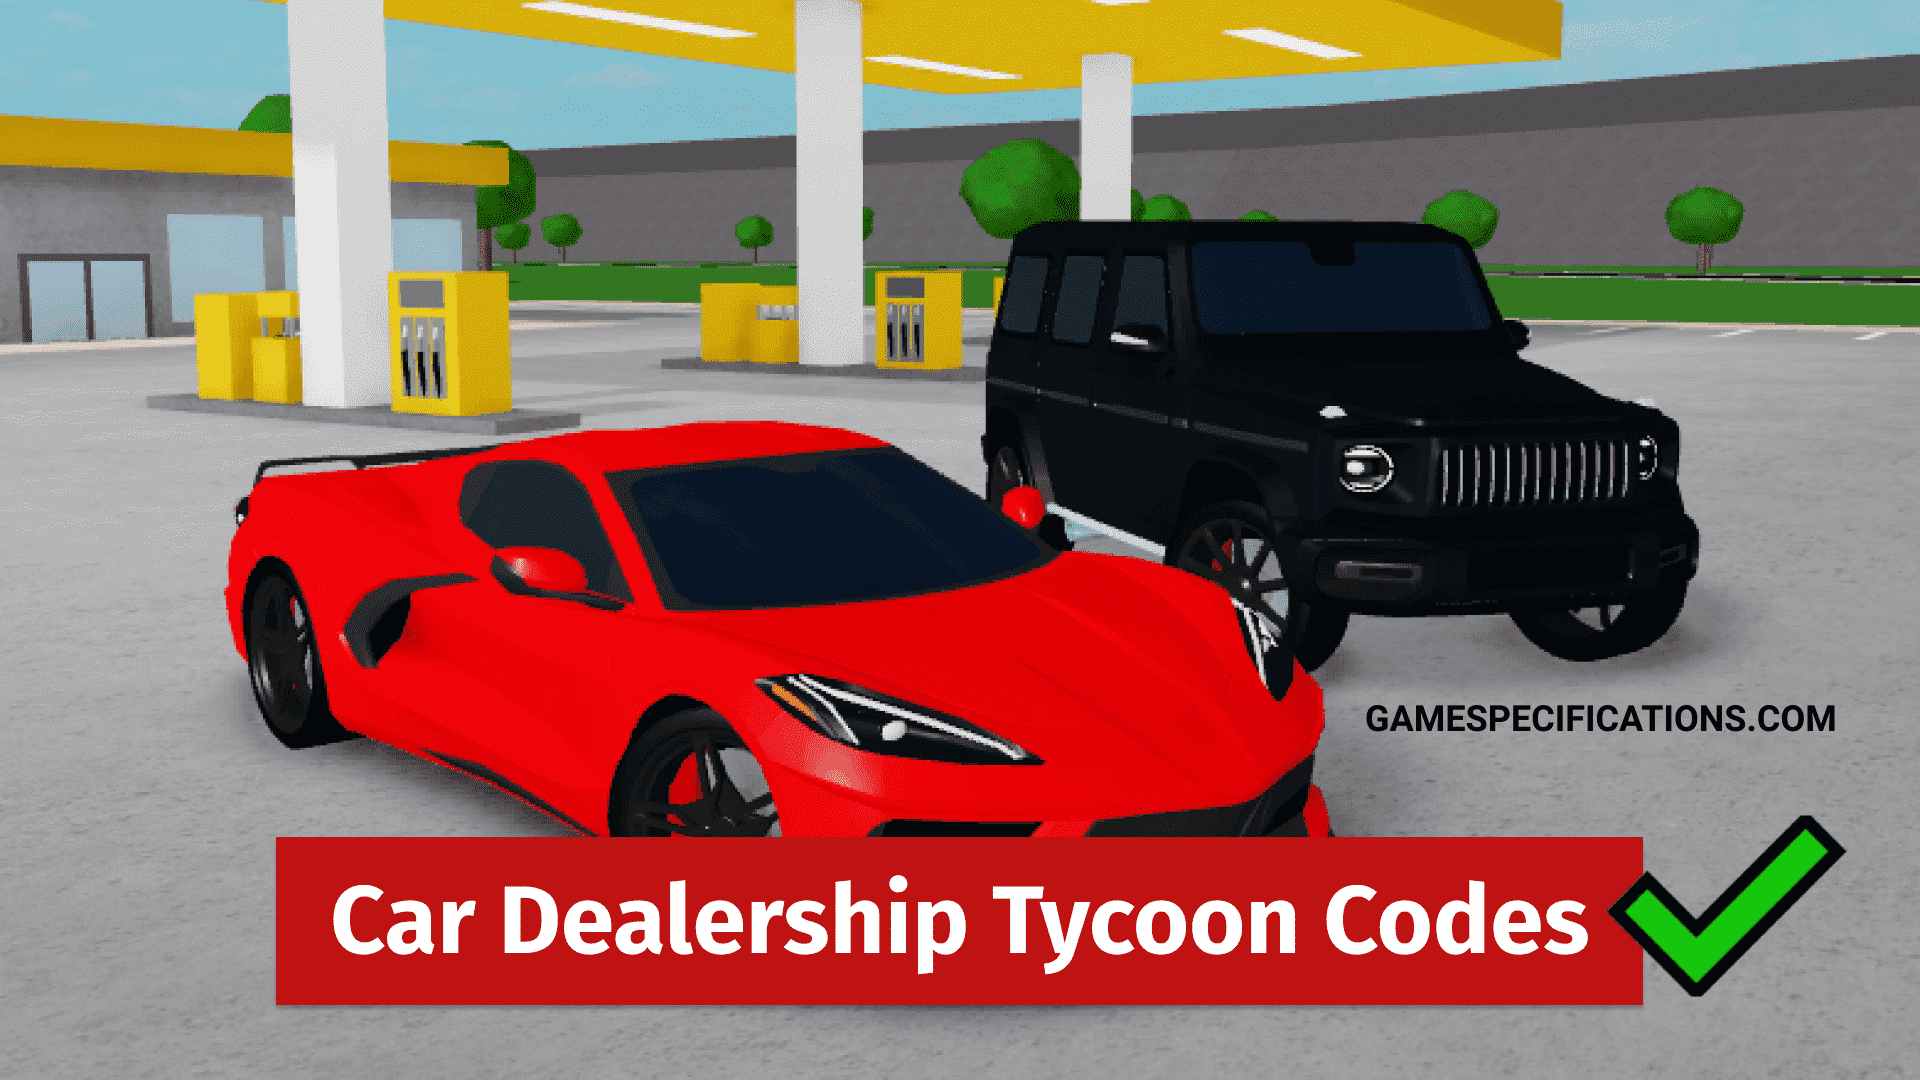 Roblox Car Dealership Tycoon Codes July 2021 Game Specifications - roblox xbox child code 914